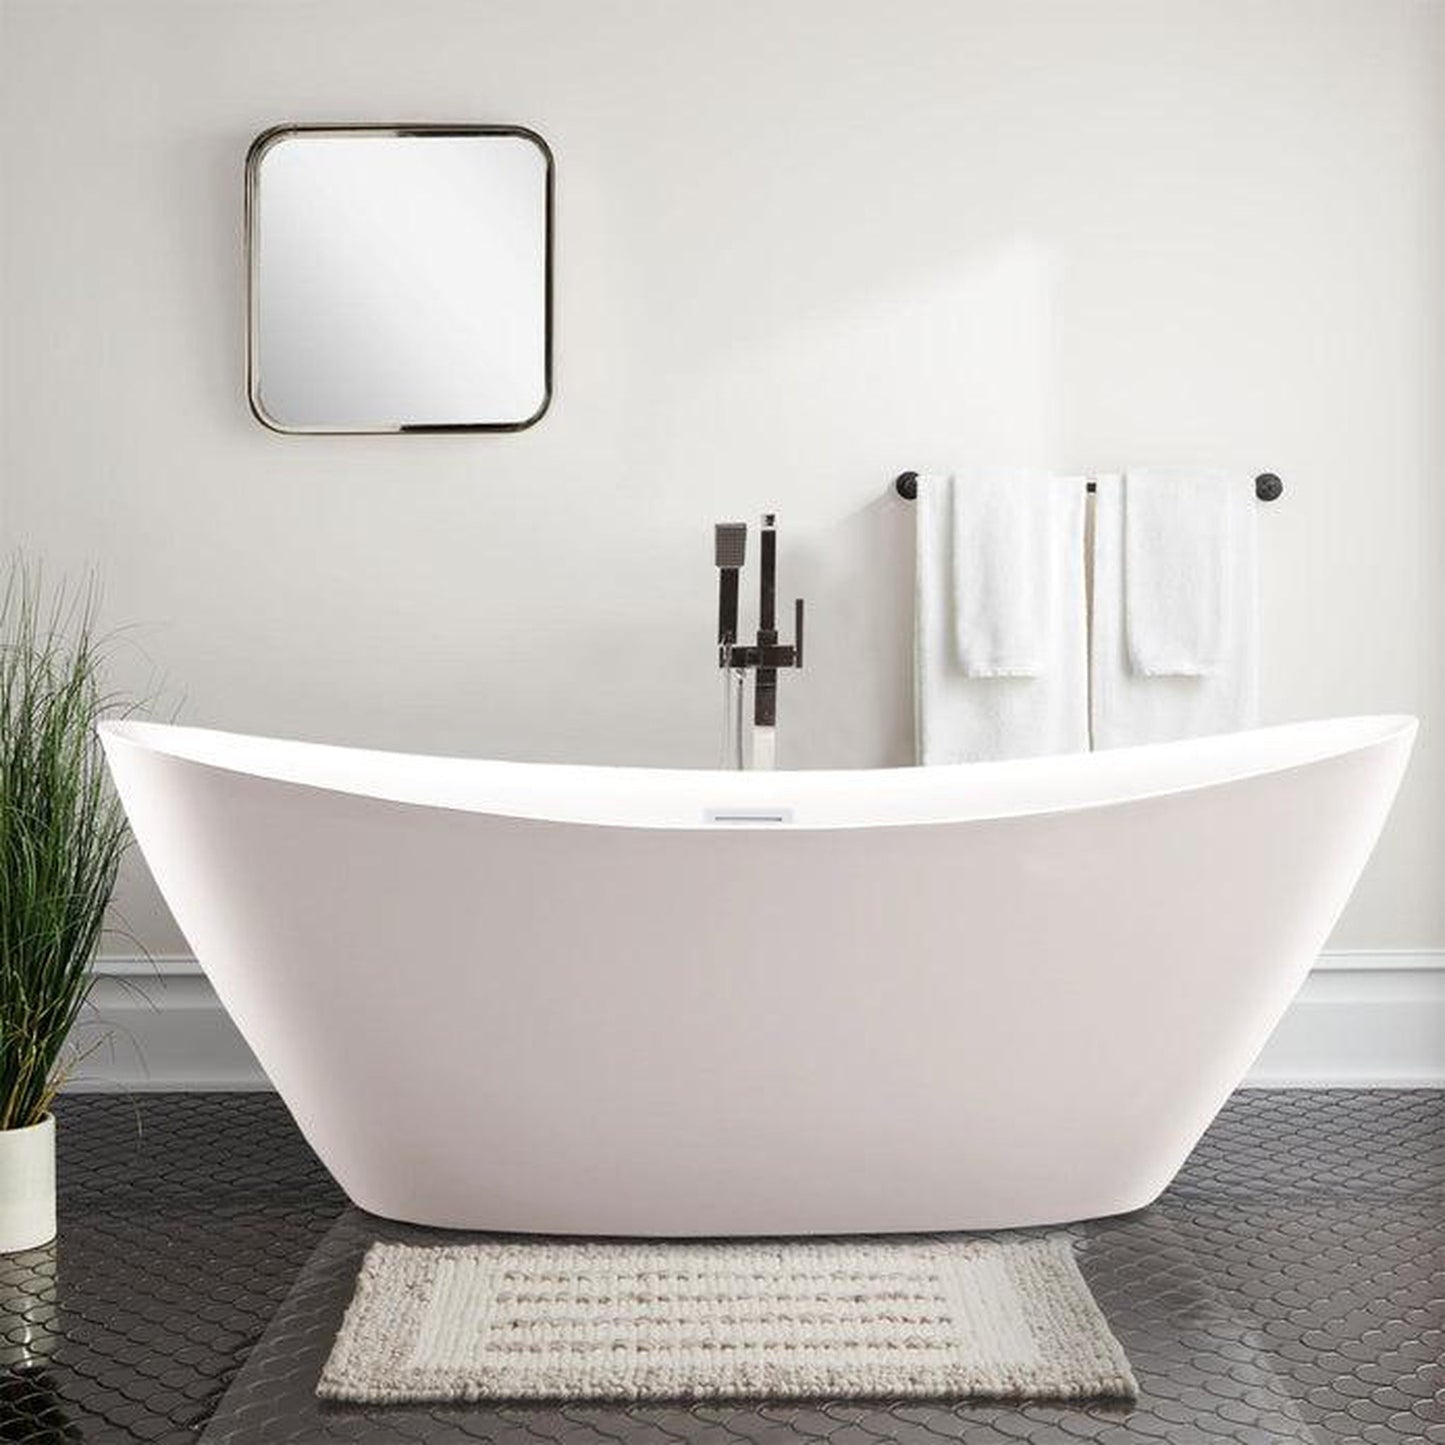 Vanity Art 71" W x 26" H White Acrylic Non-Slip Oval Freestanding Bathtub With Pure White Pop-up Drain, Overflow and Flexible Drain Hose